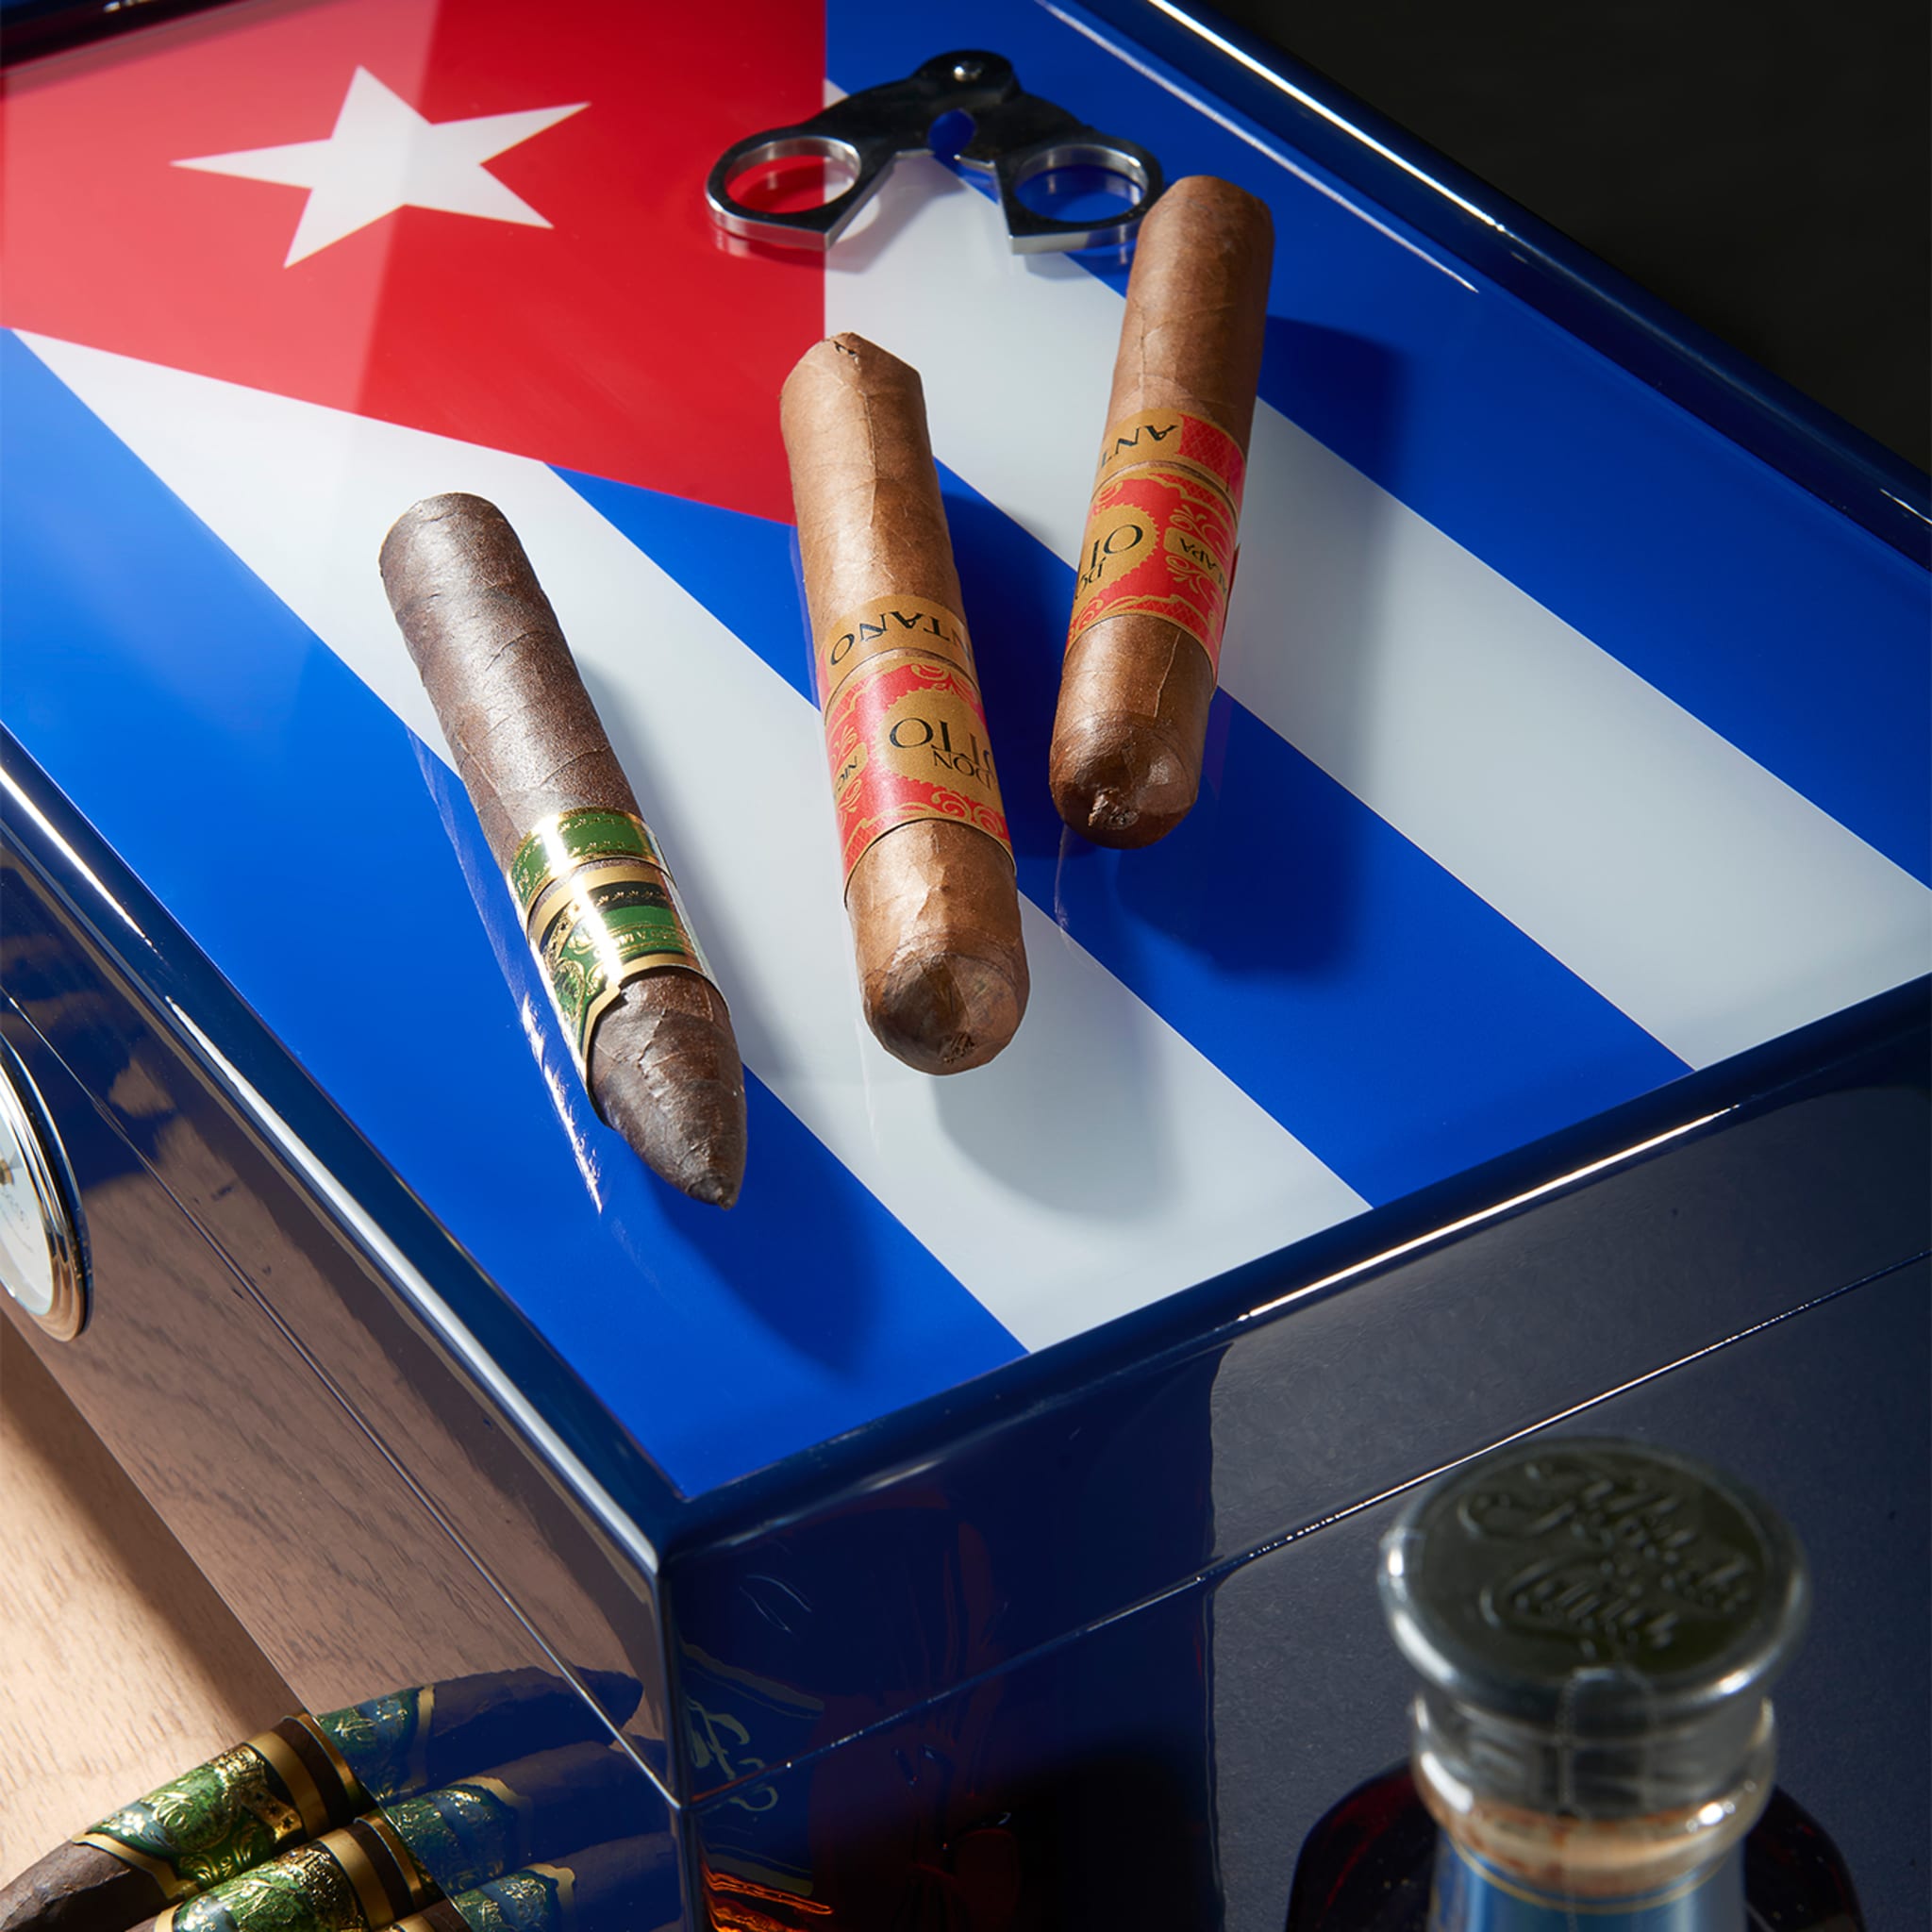 Cuba-inspired Blue Humidor (Special Club Edition)  - Alternative view 5